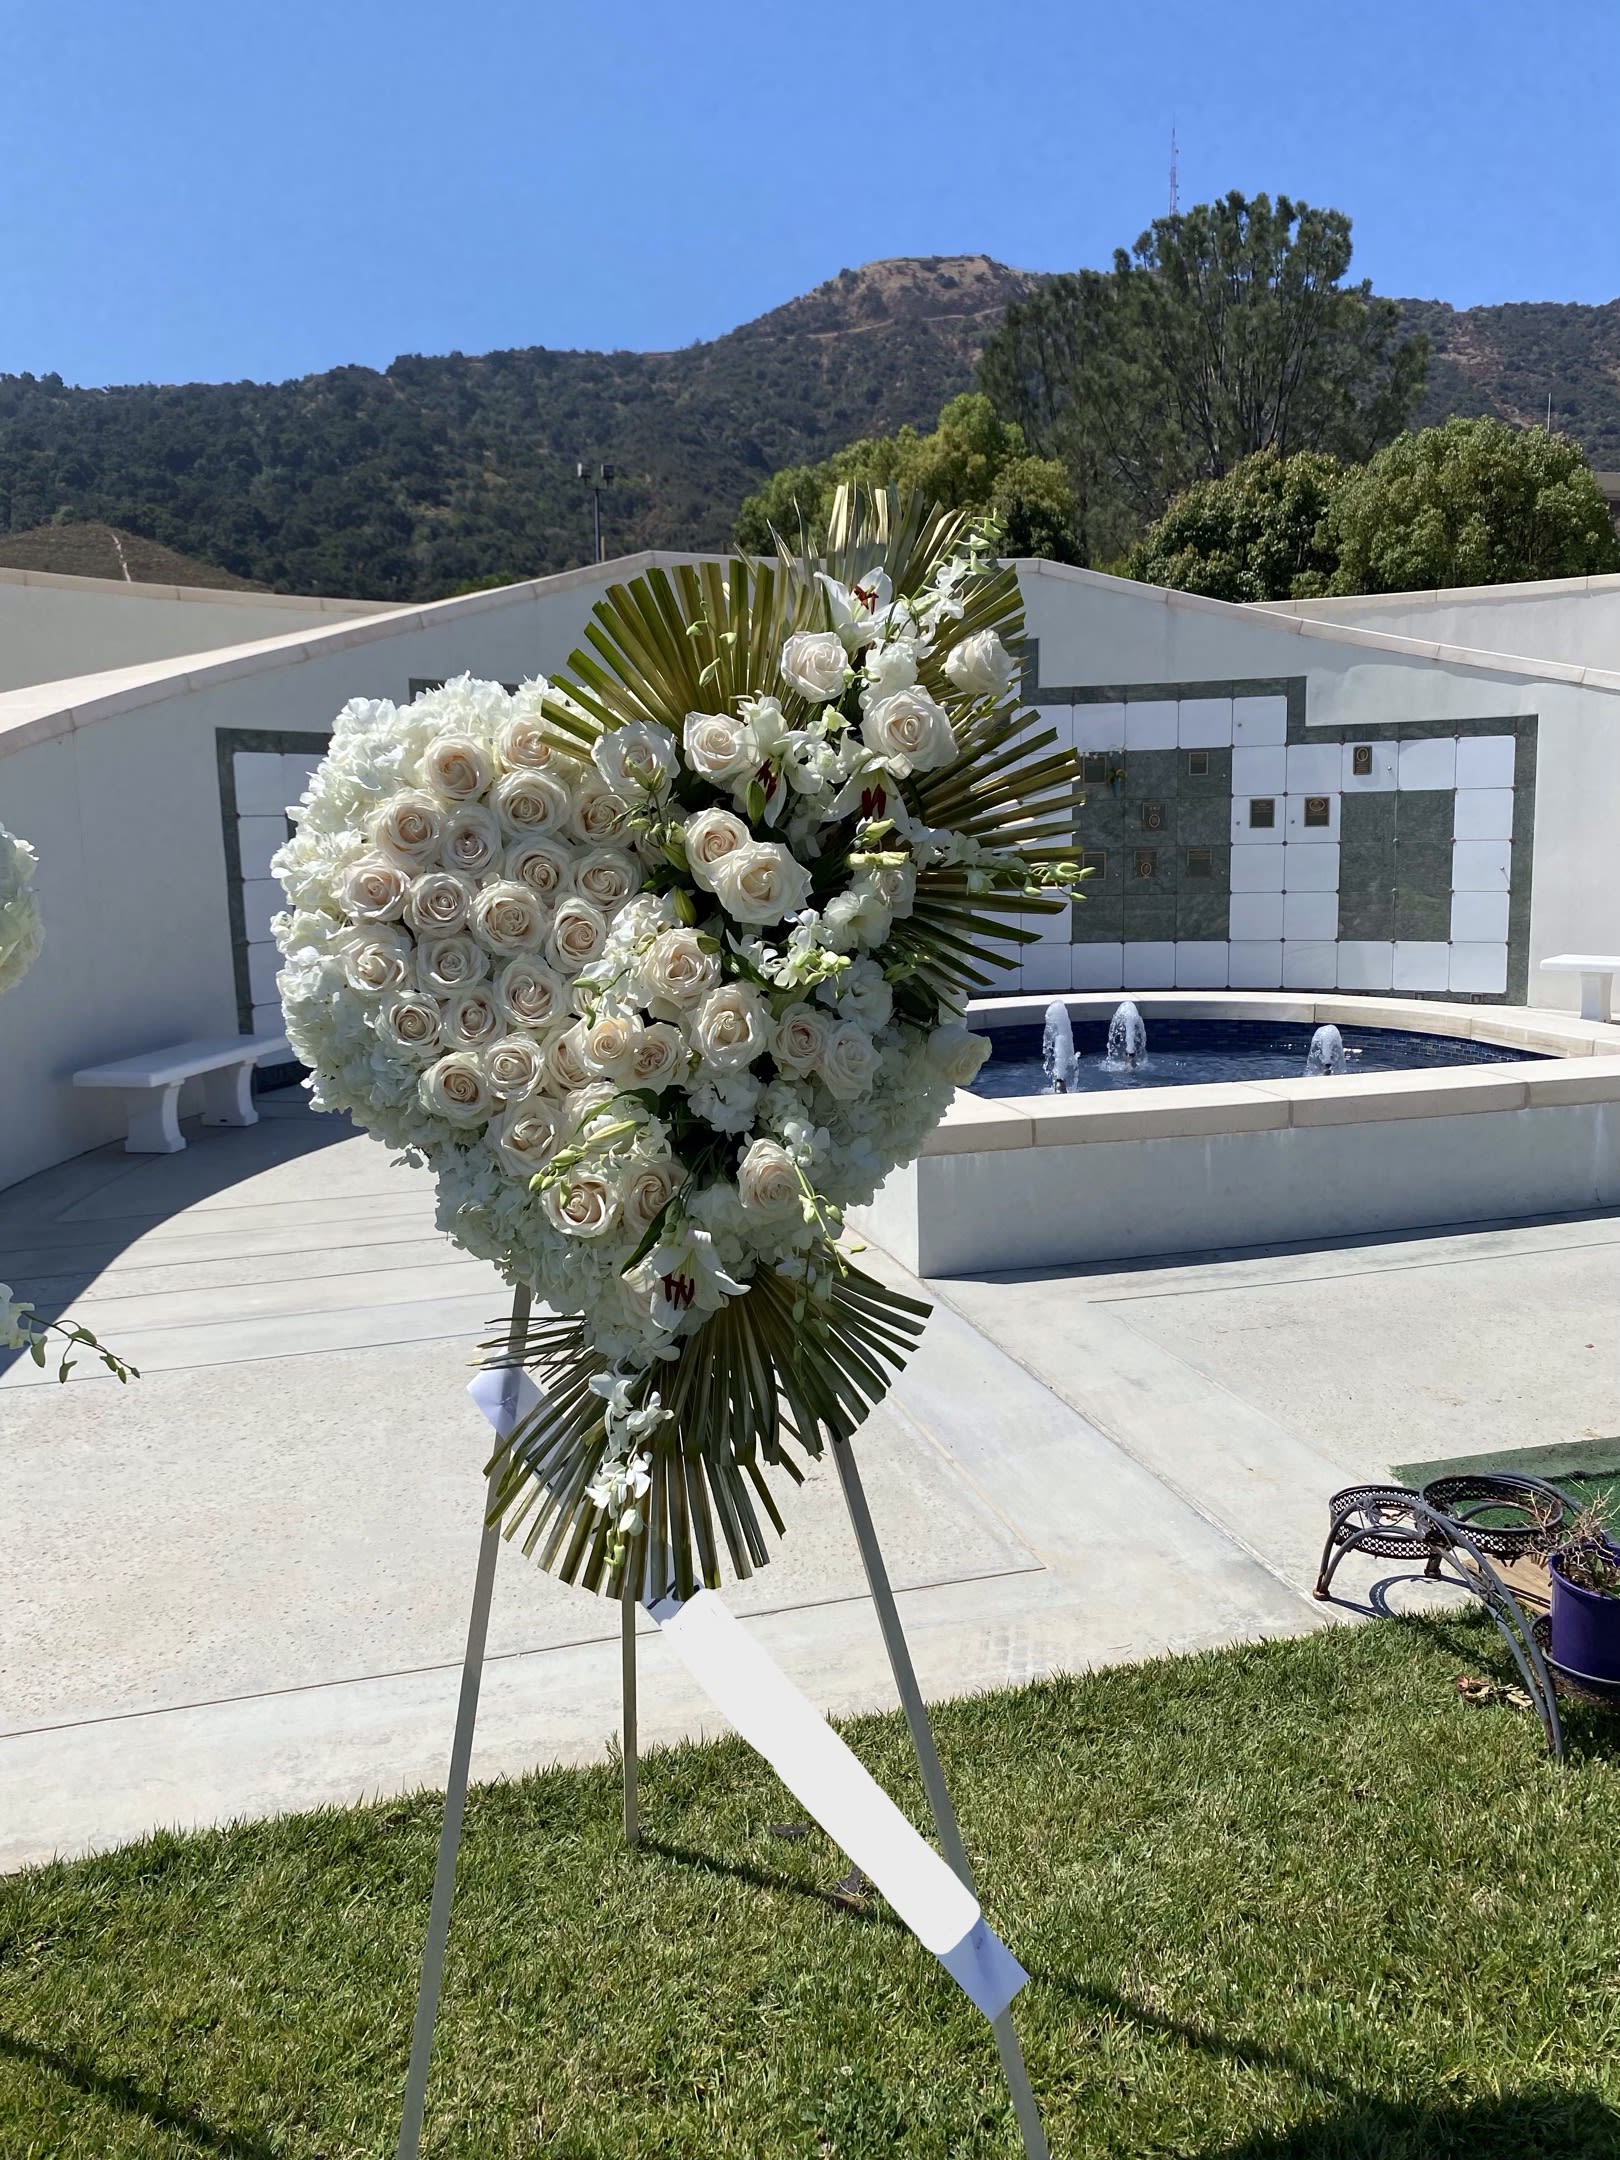 White Clouds - Buzzy Bee Flowers - An all white tribute, this white Heart funeral spray is pure and tranquil. Featuring a variety of white flowers, this elegant easel compliments the beauty of life.